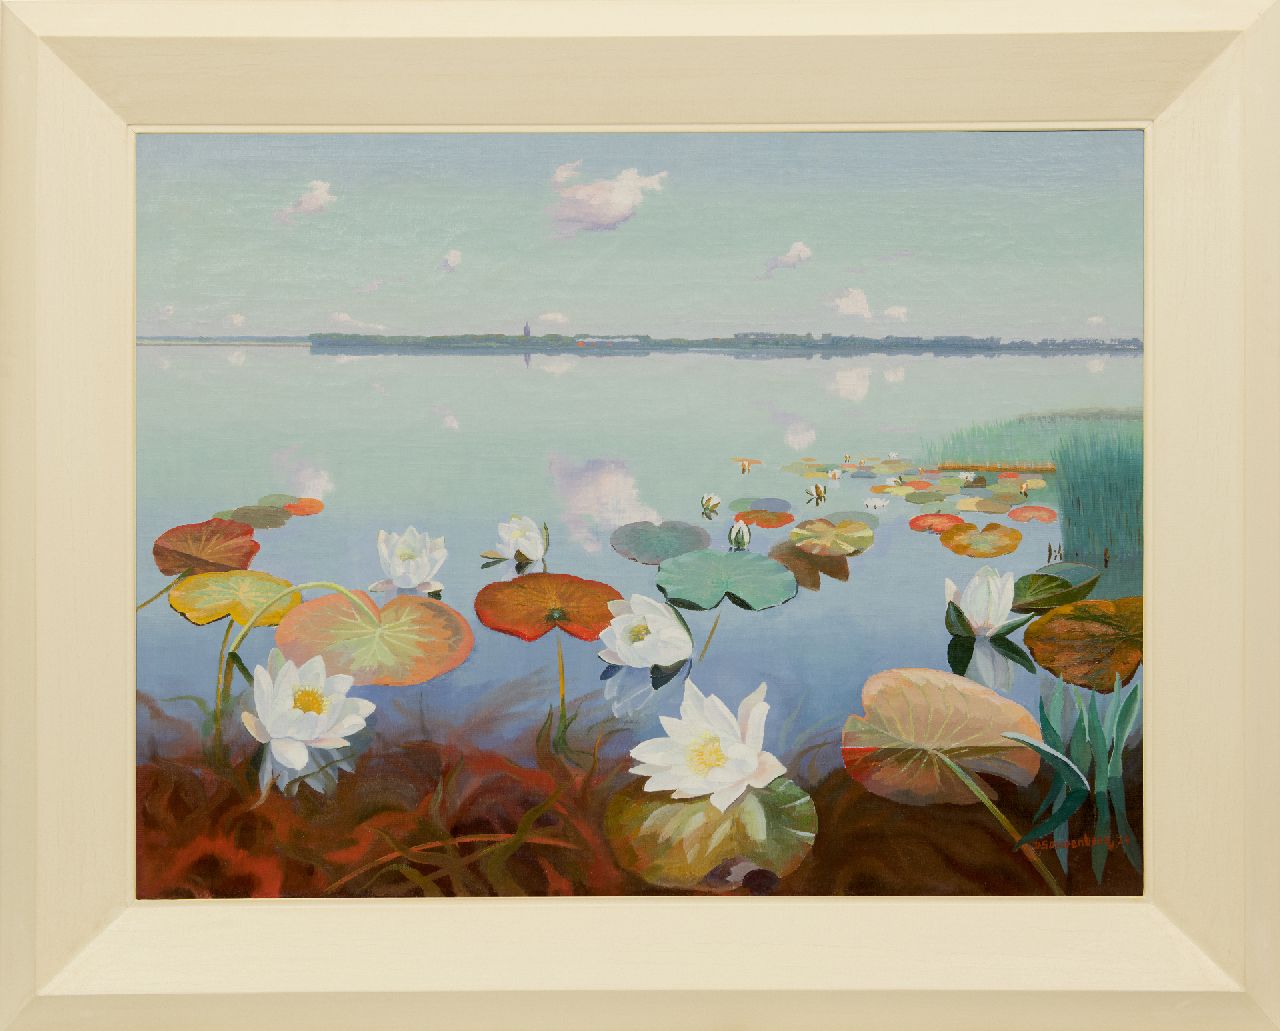 Smorenberg D.  | Dirk Smorenberg | Paintings offered for sale | Lake near Loosdrecht with water lilies, oil on canvas 70.2 x 89.9 cm, signed l.r. and dated '24